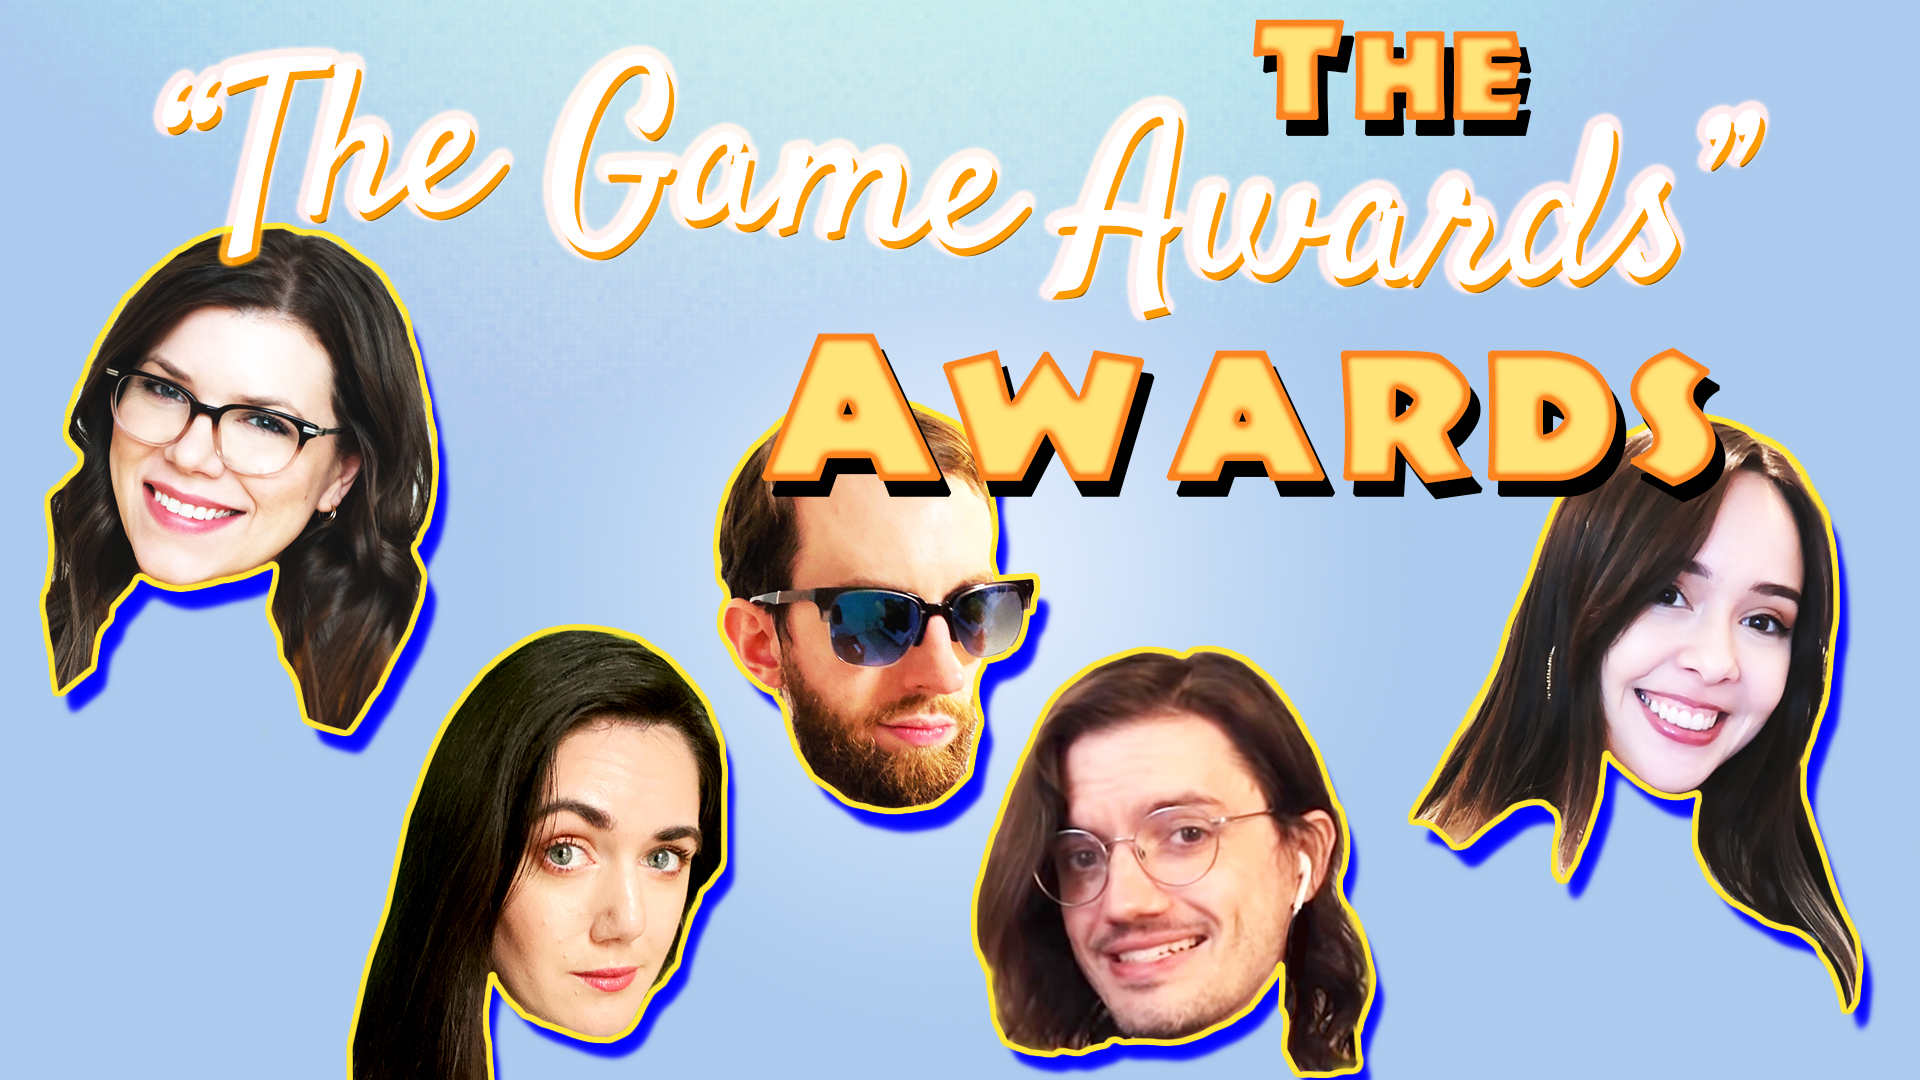 The floating heads of Polygon Video Team members over a blue background, with text reading “The “The Game Awards” Awards.” The team members seem happy and are smiling.